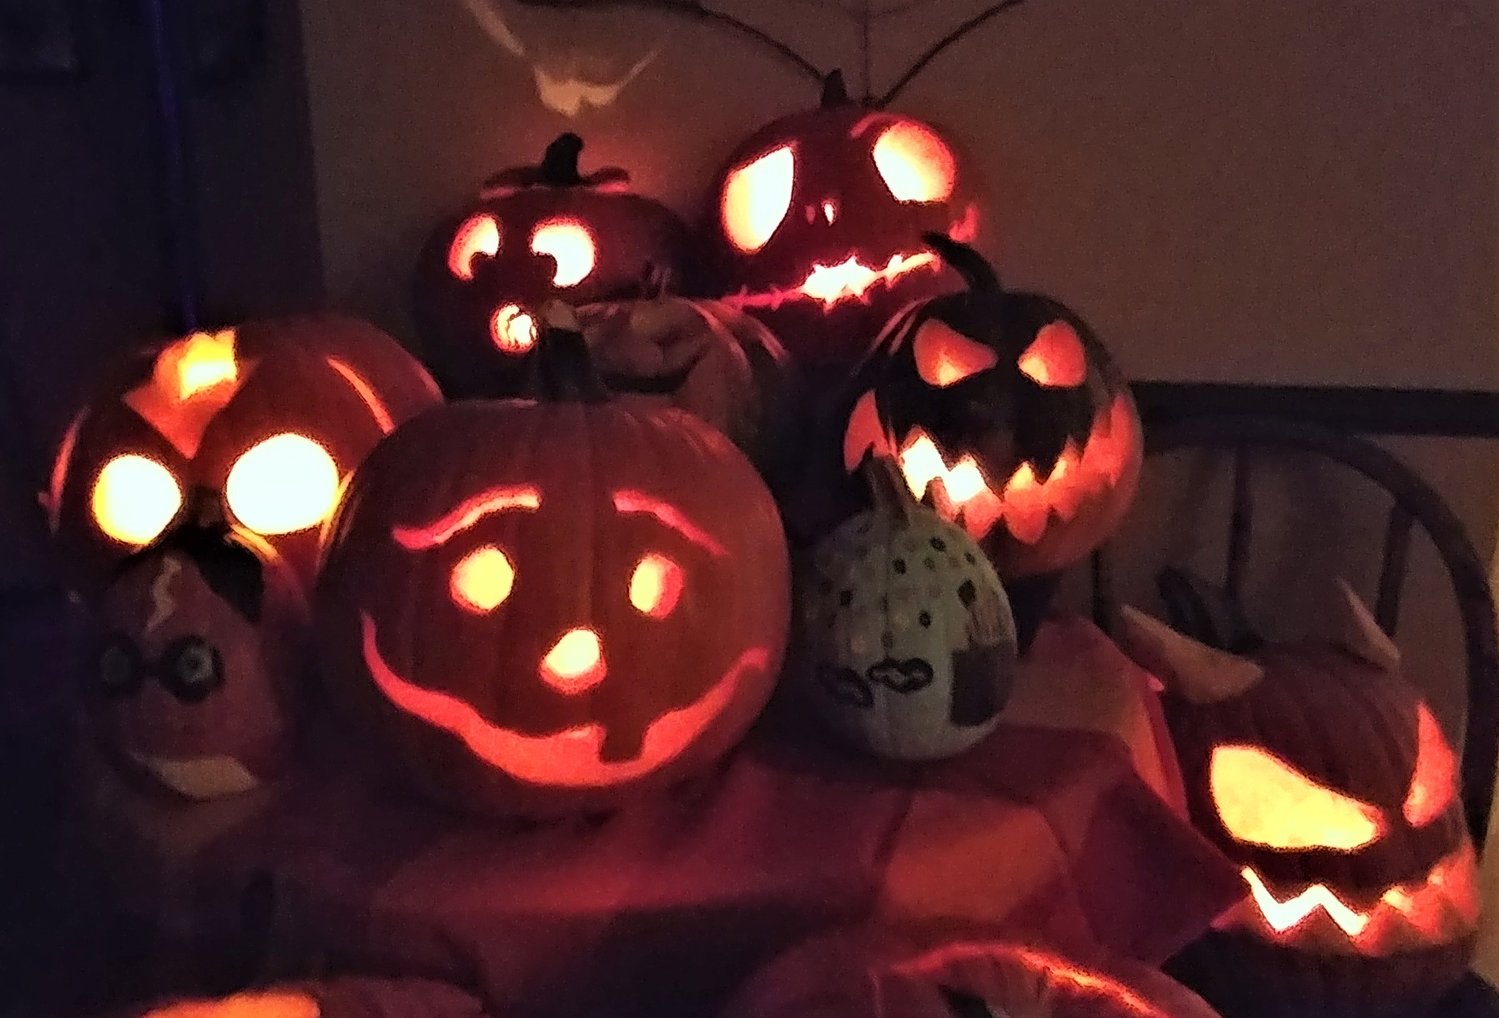 Pumpkins from an October 2019 Las Cruces carving party.